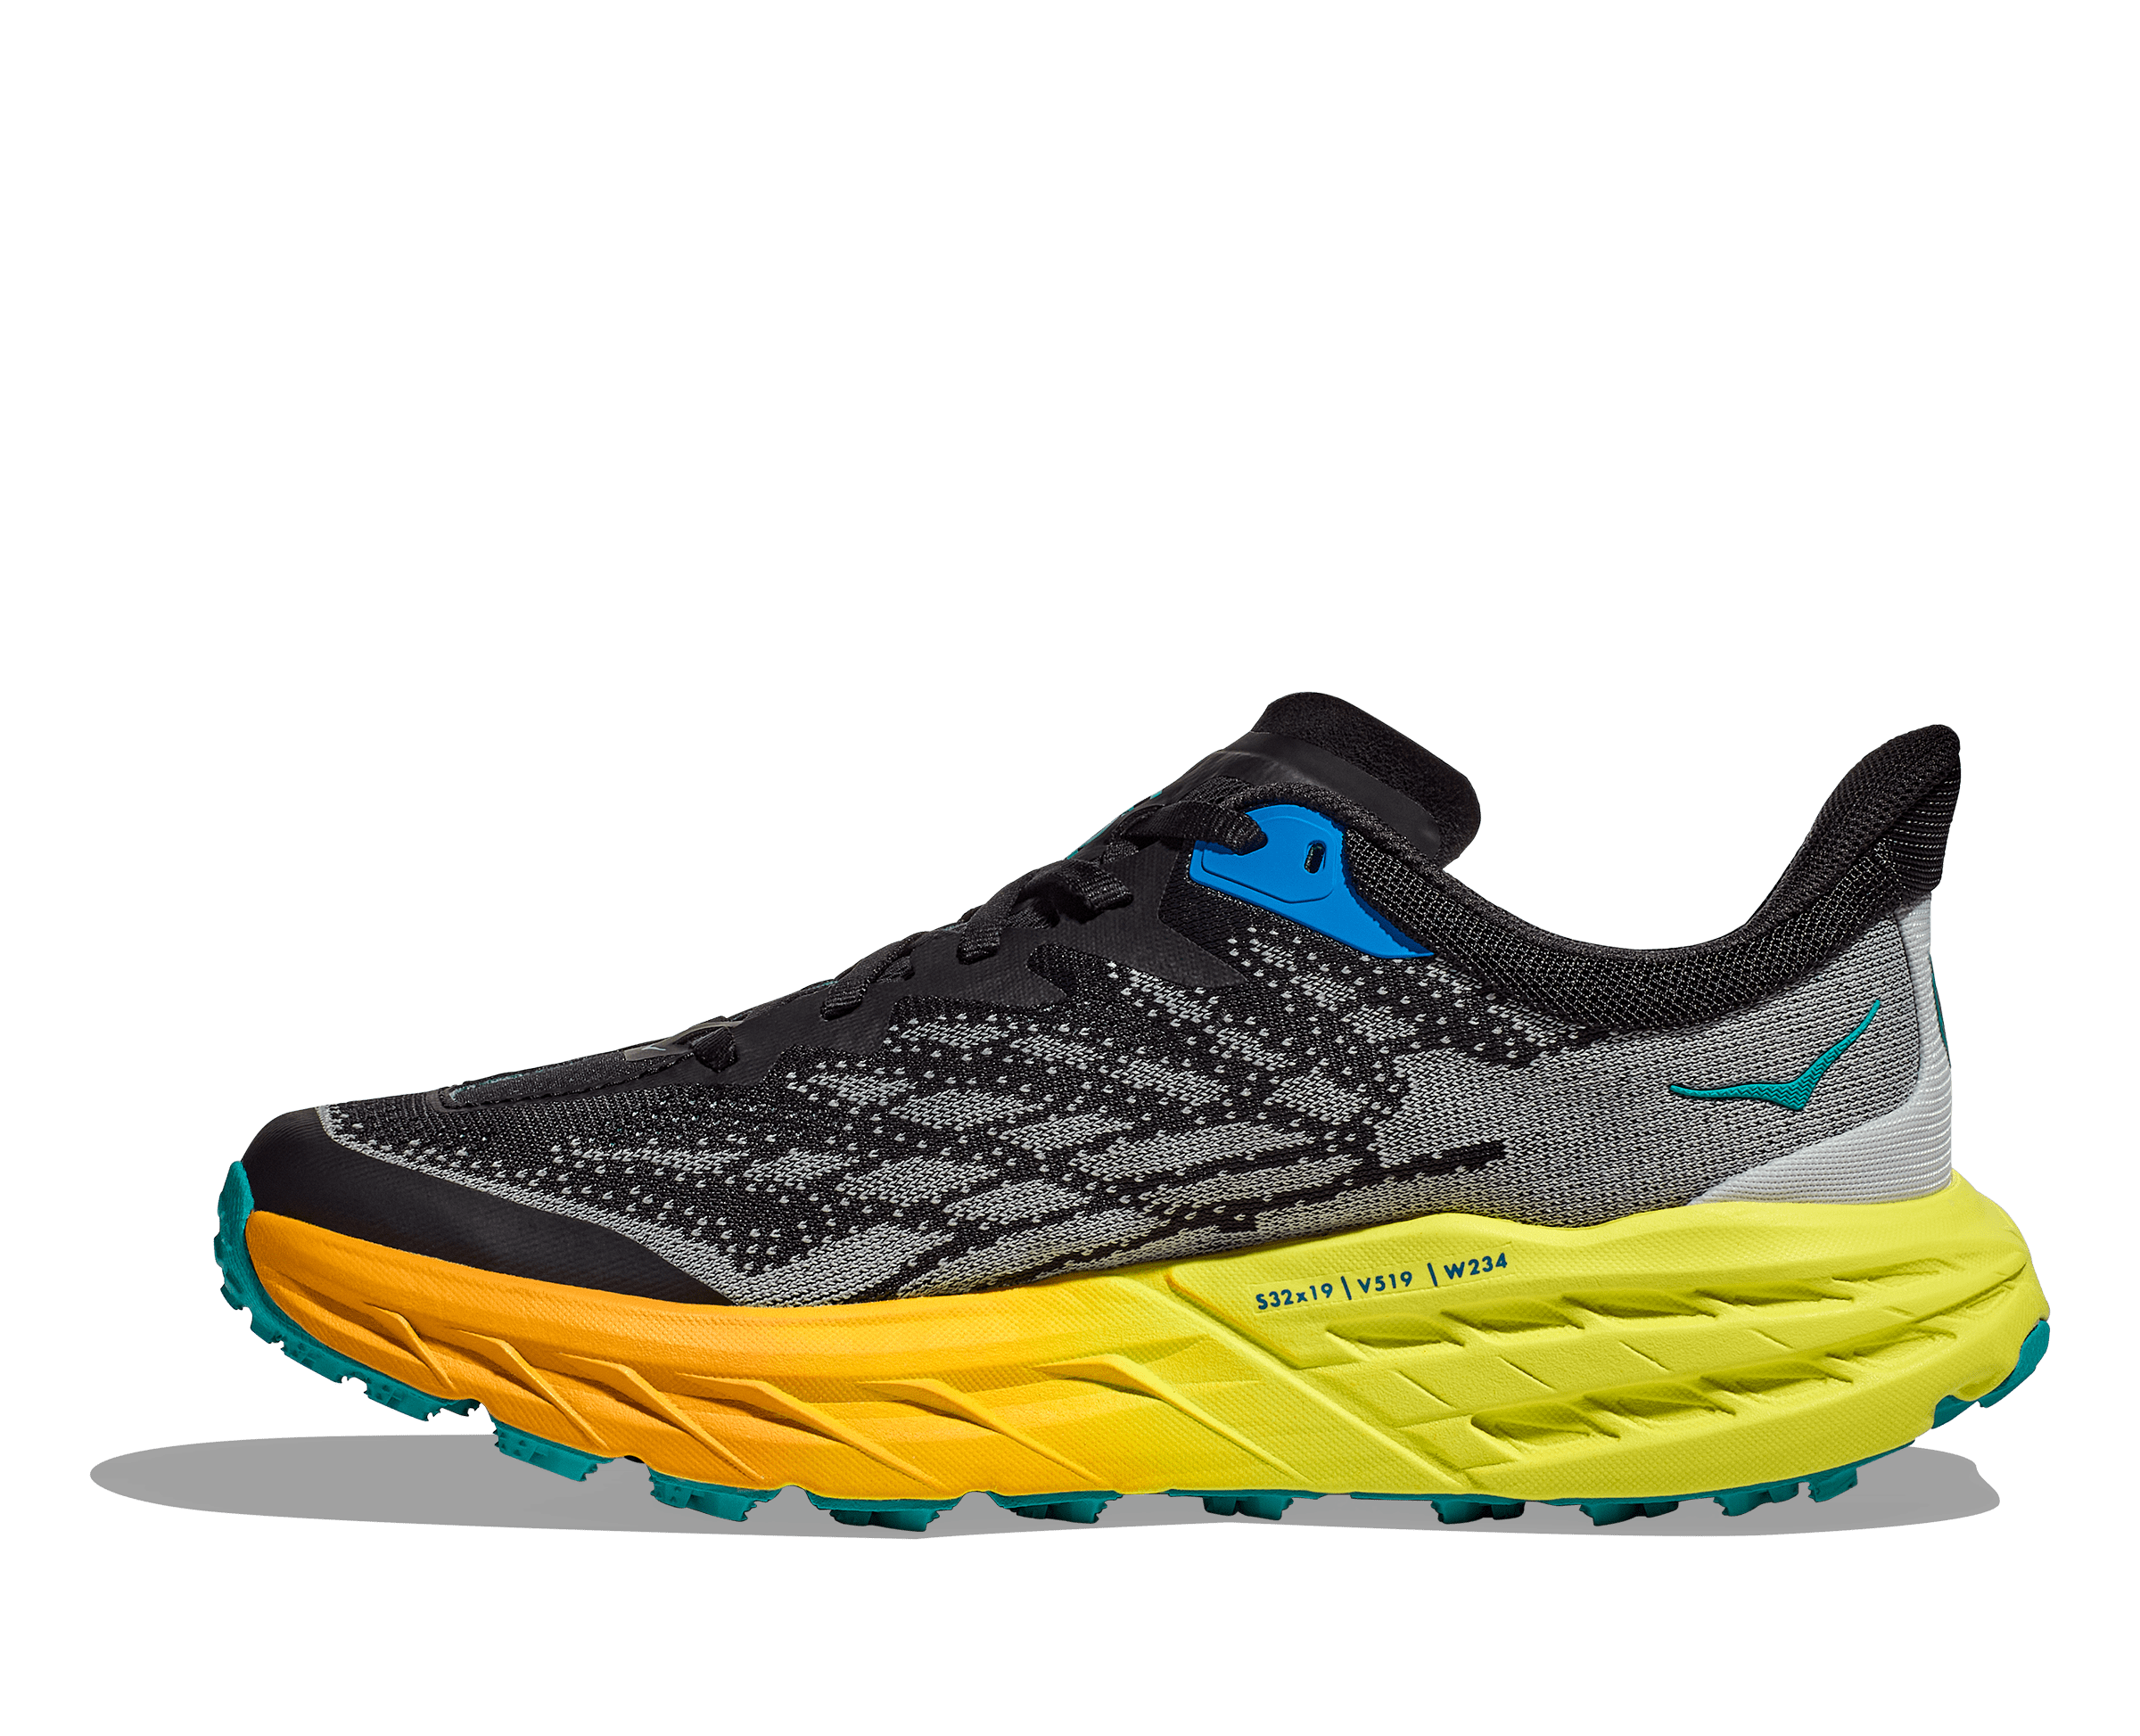 Medial view of the Women's Speedgoat 5 by HOKA in Black/Evening Primrose